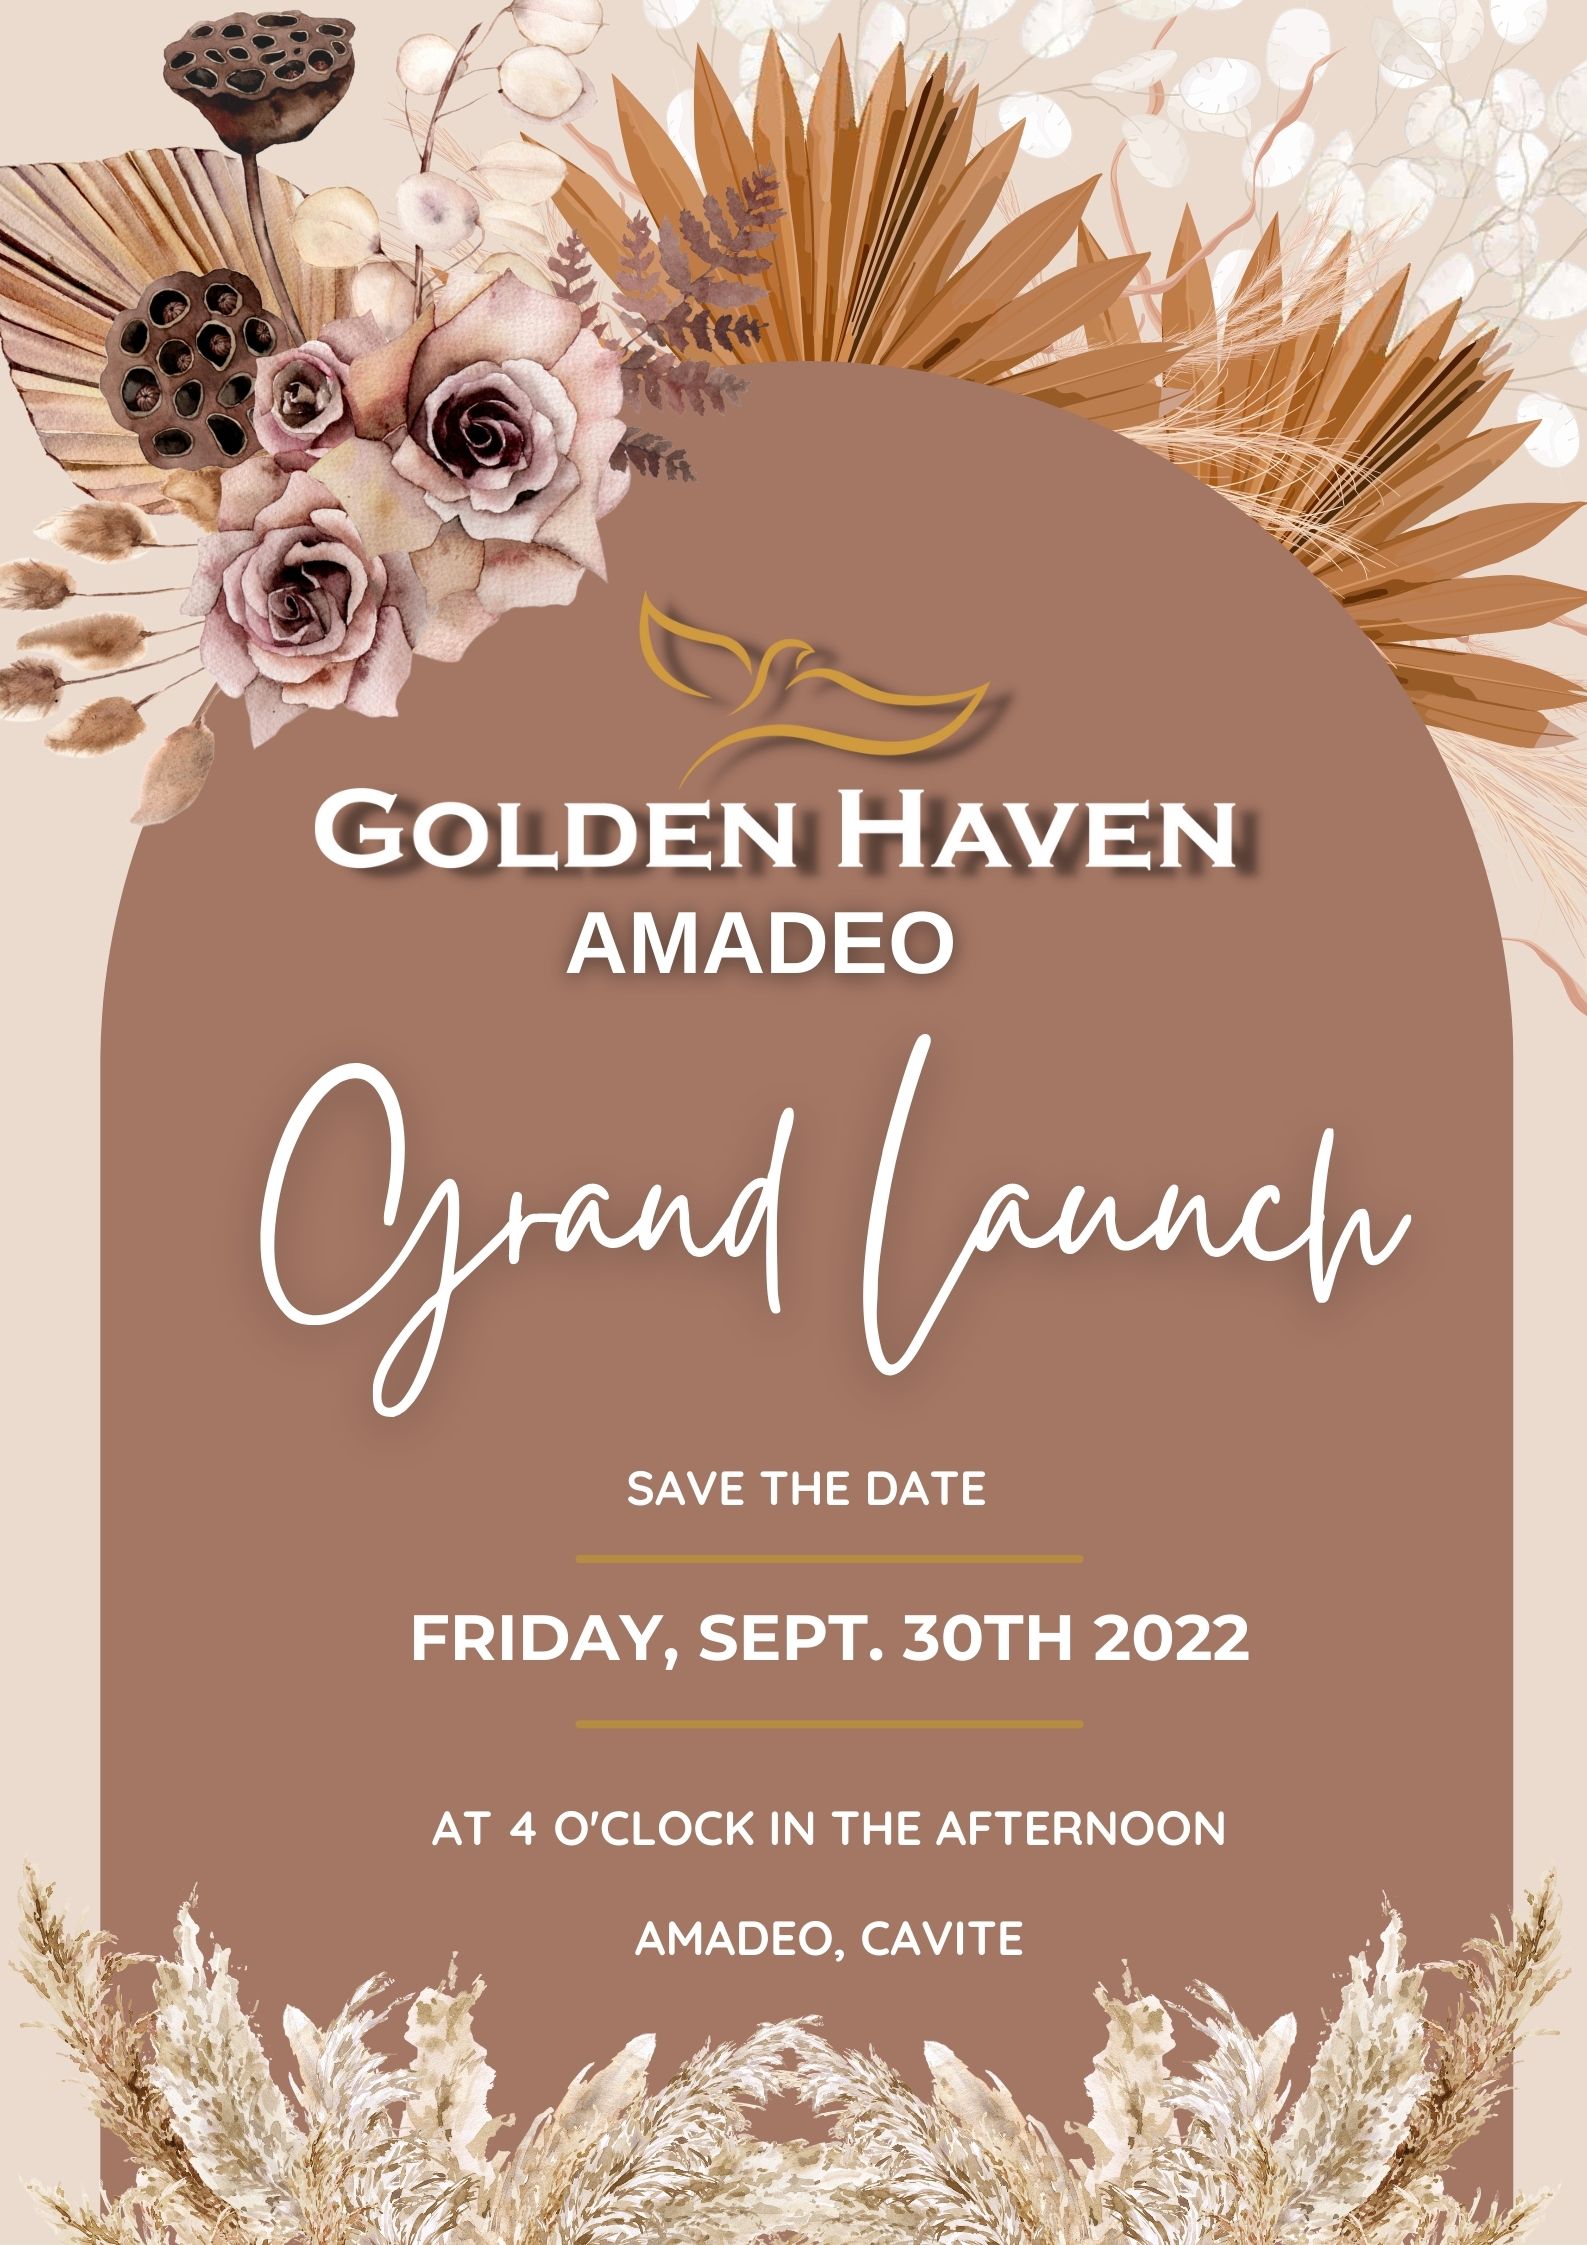 Golden Haven Amadeo the Grand Launch